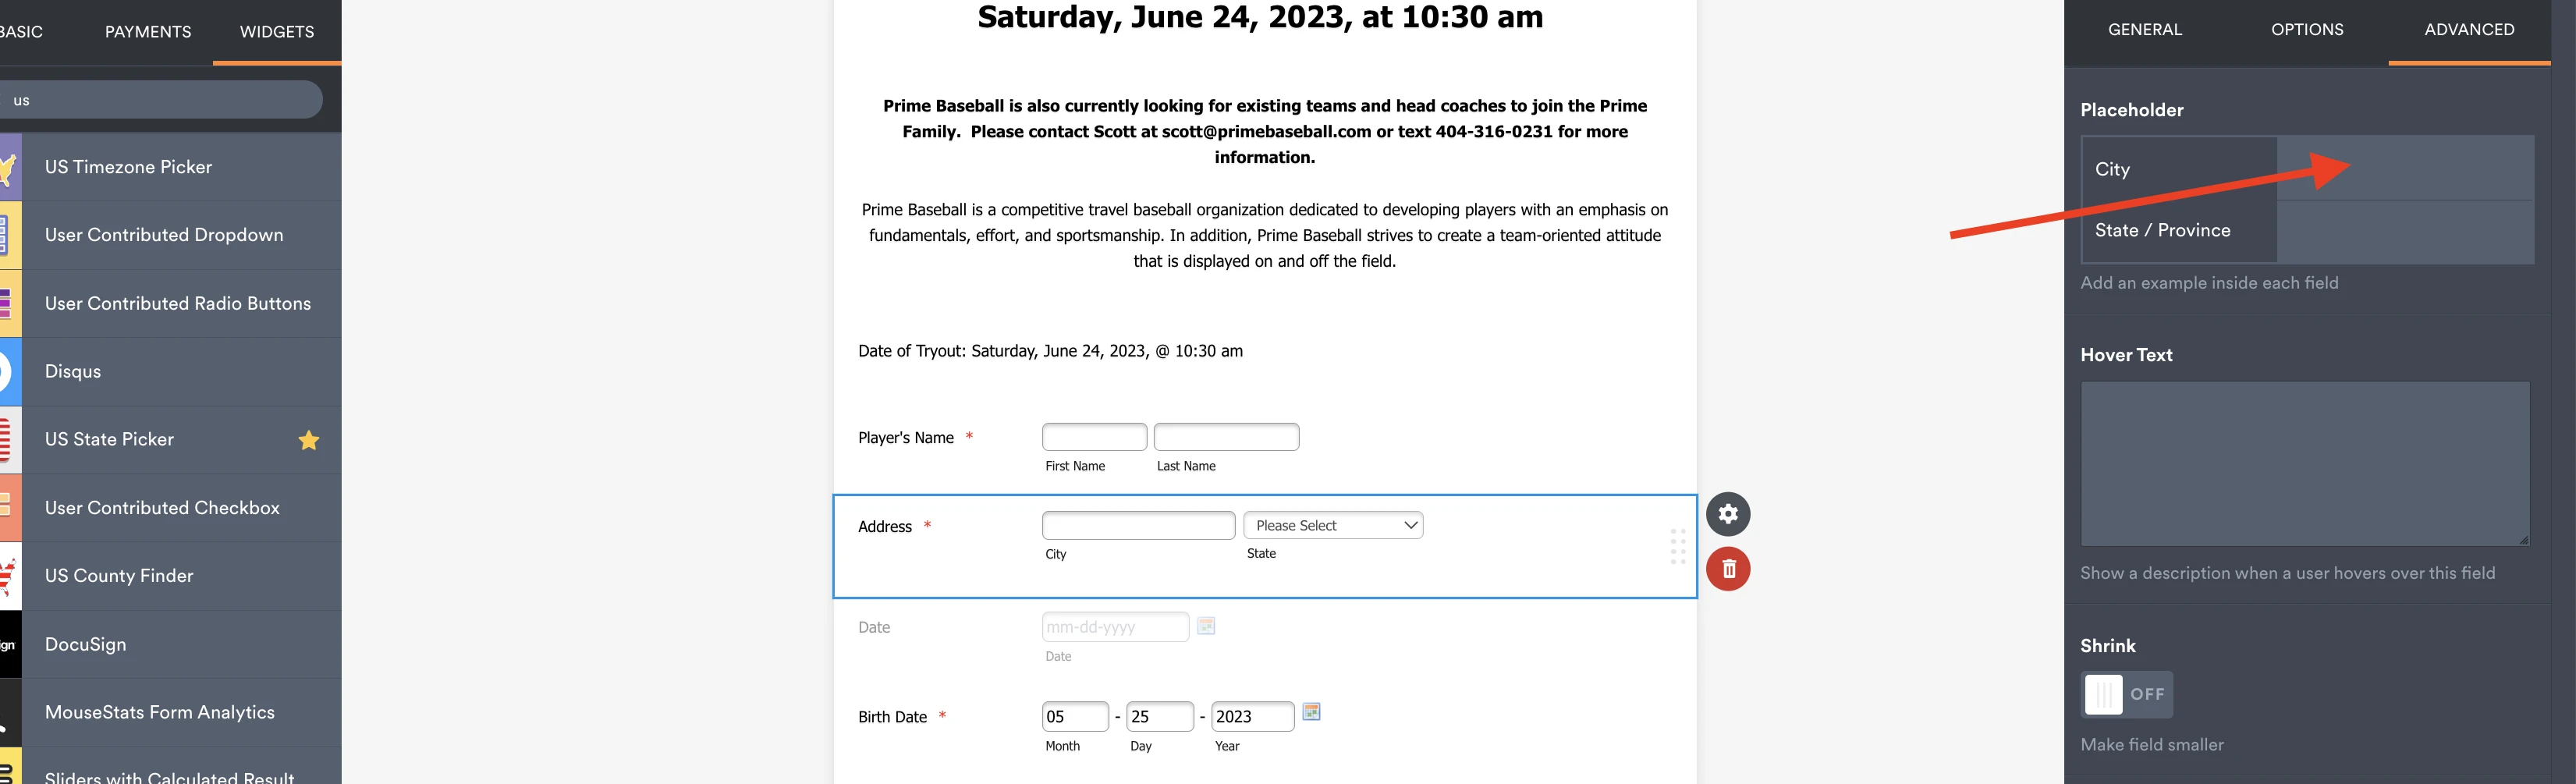 How can I have the form accept the city not the street address? Image 1 Screenshot 30